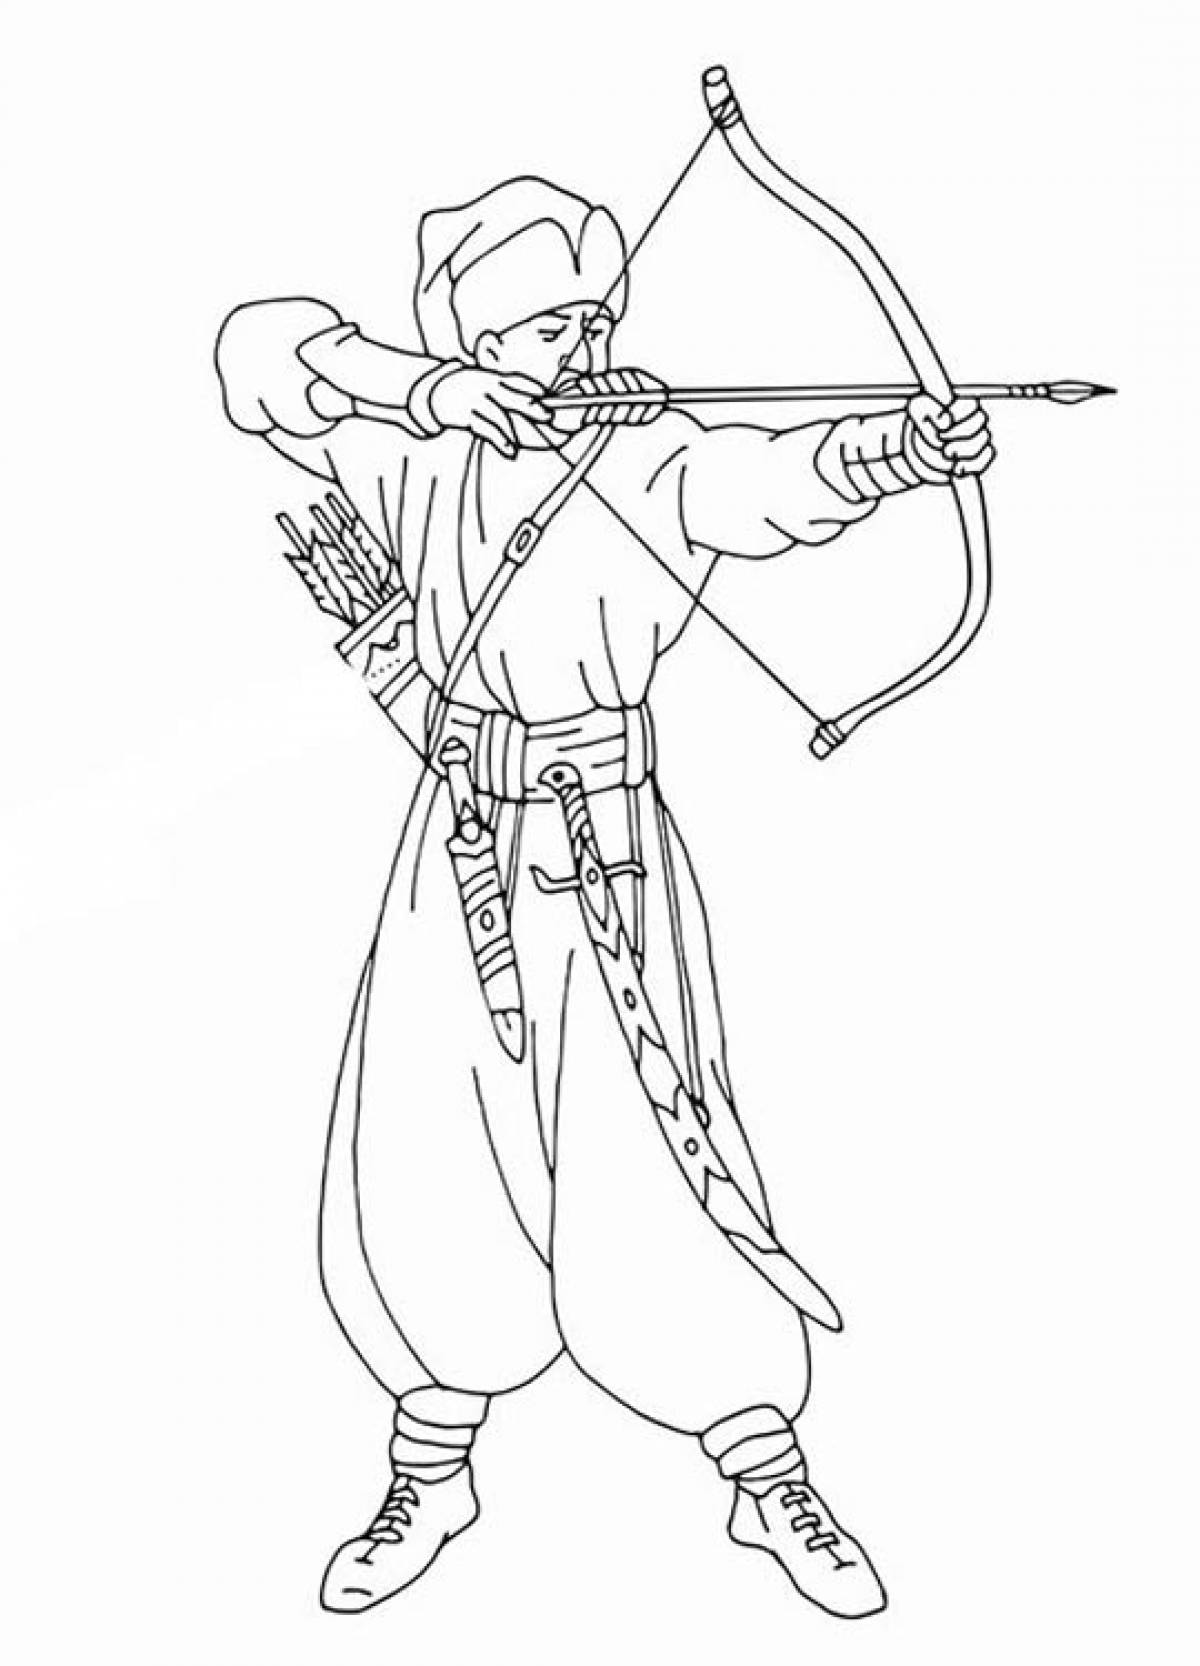 Cossack with bow